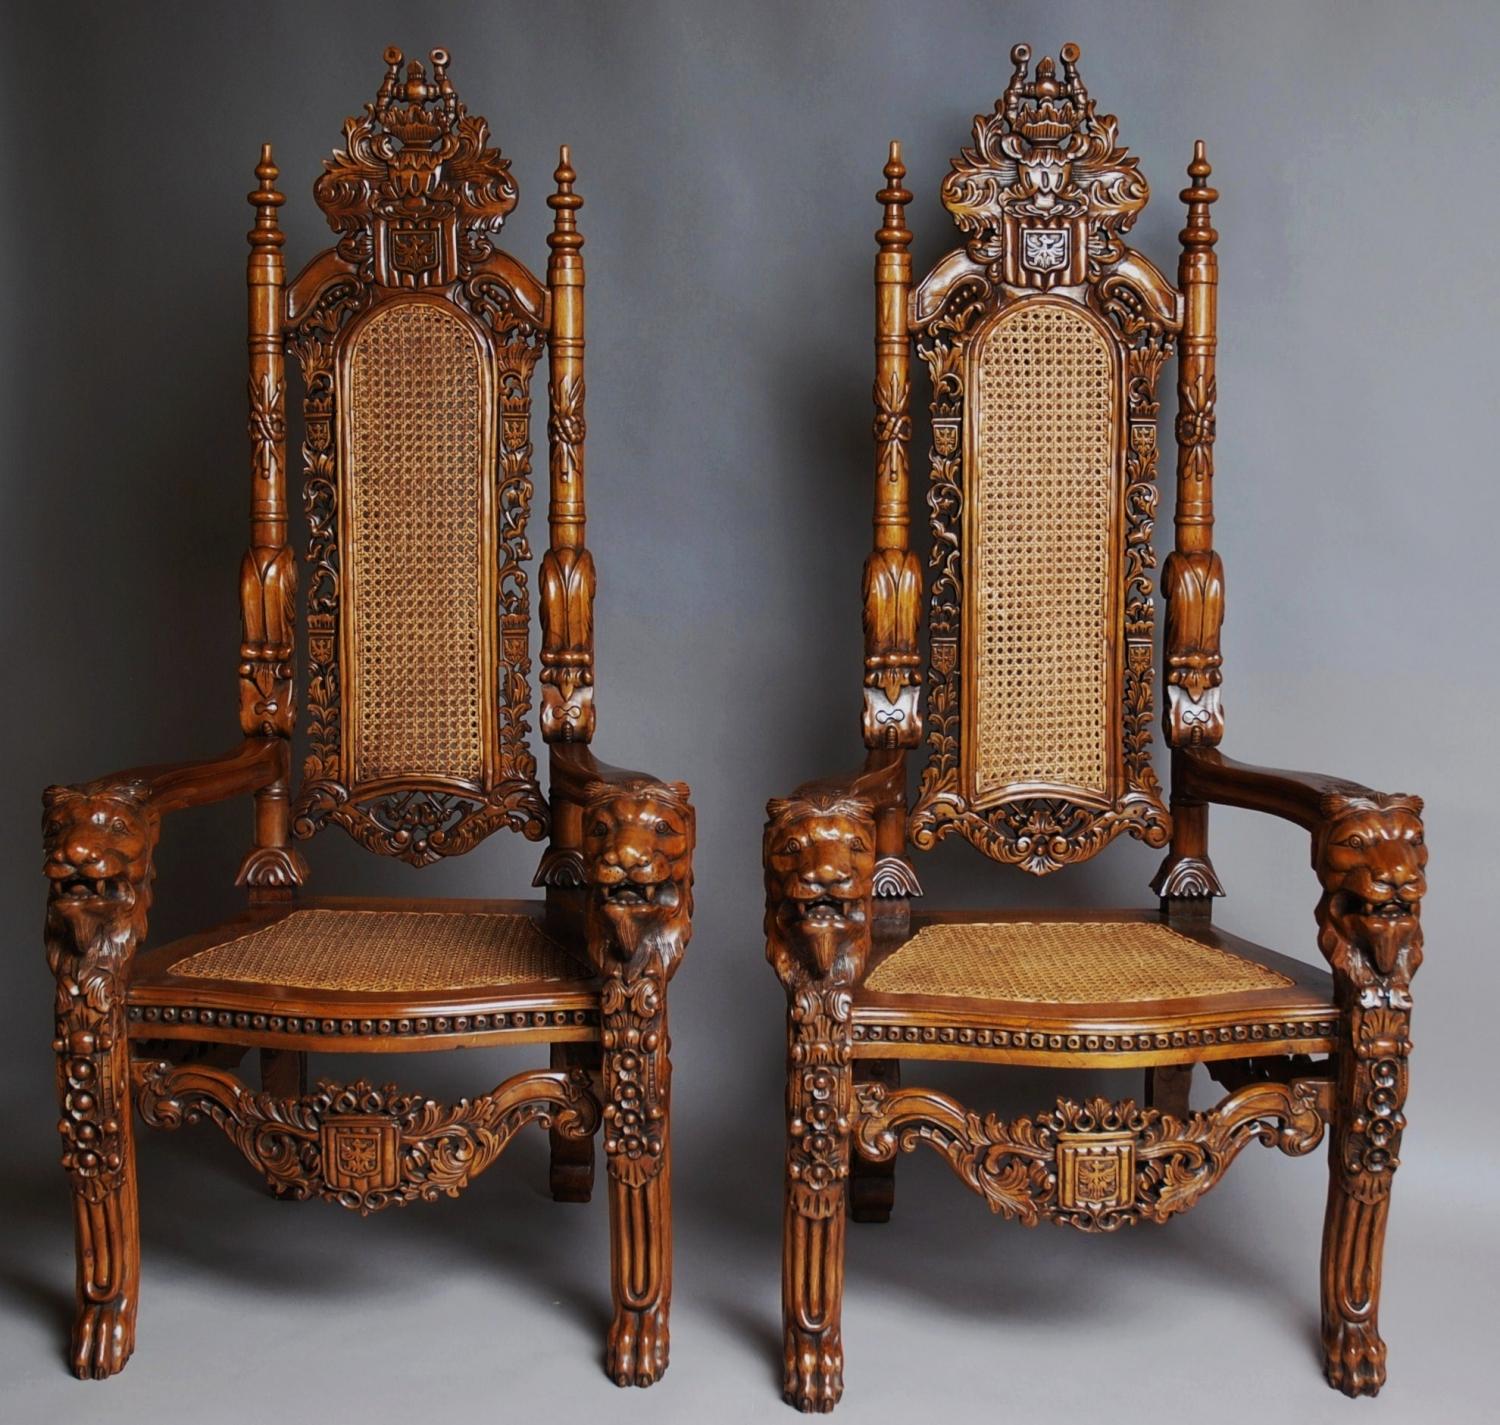 Pair of large Ceremonial chairs